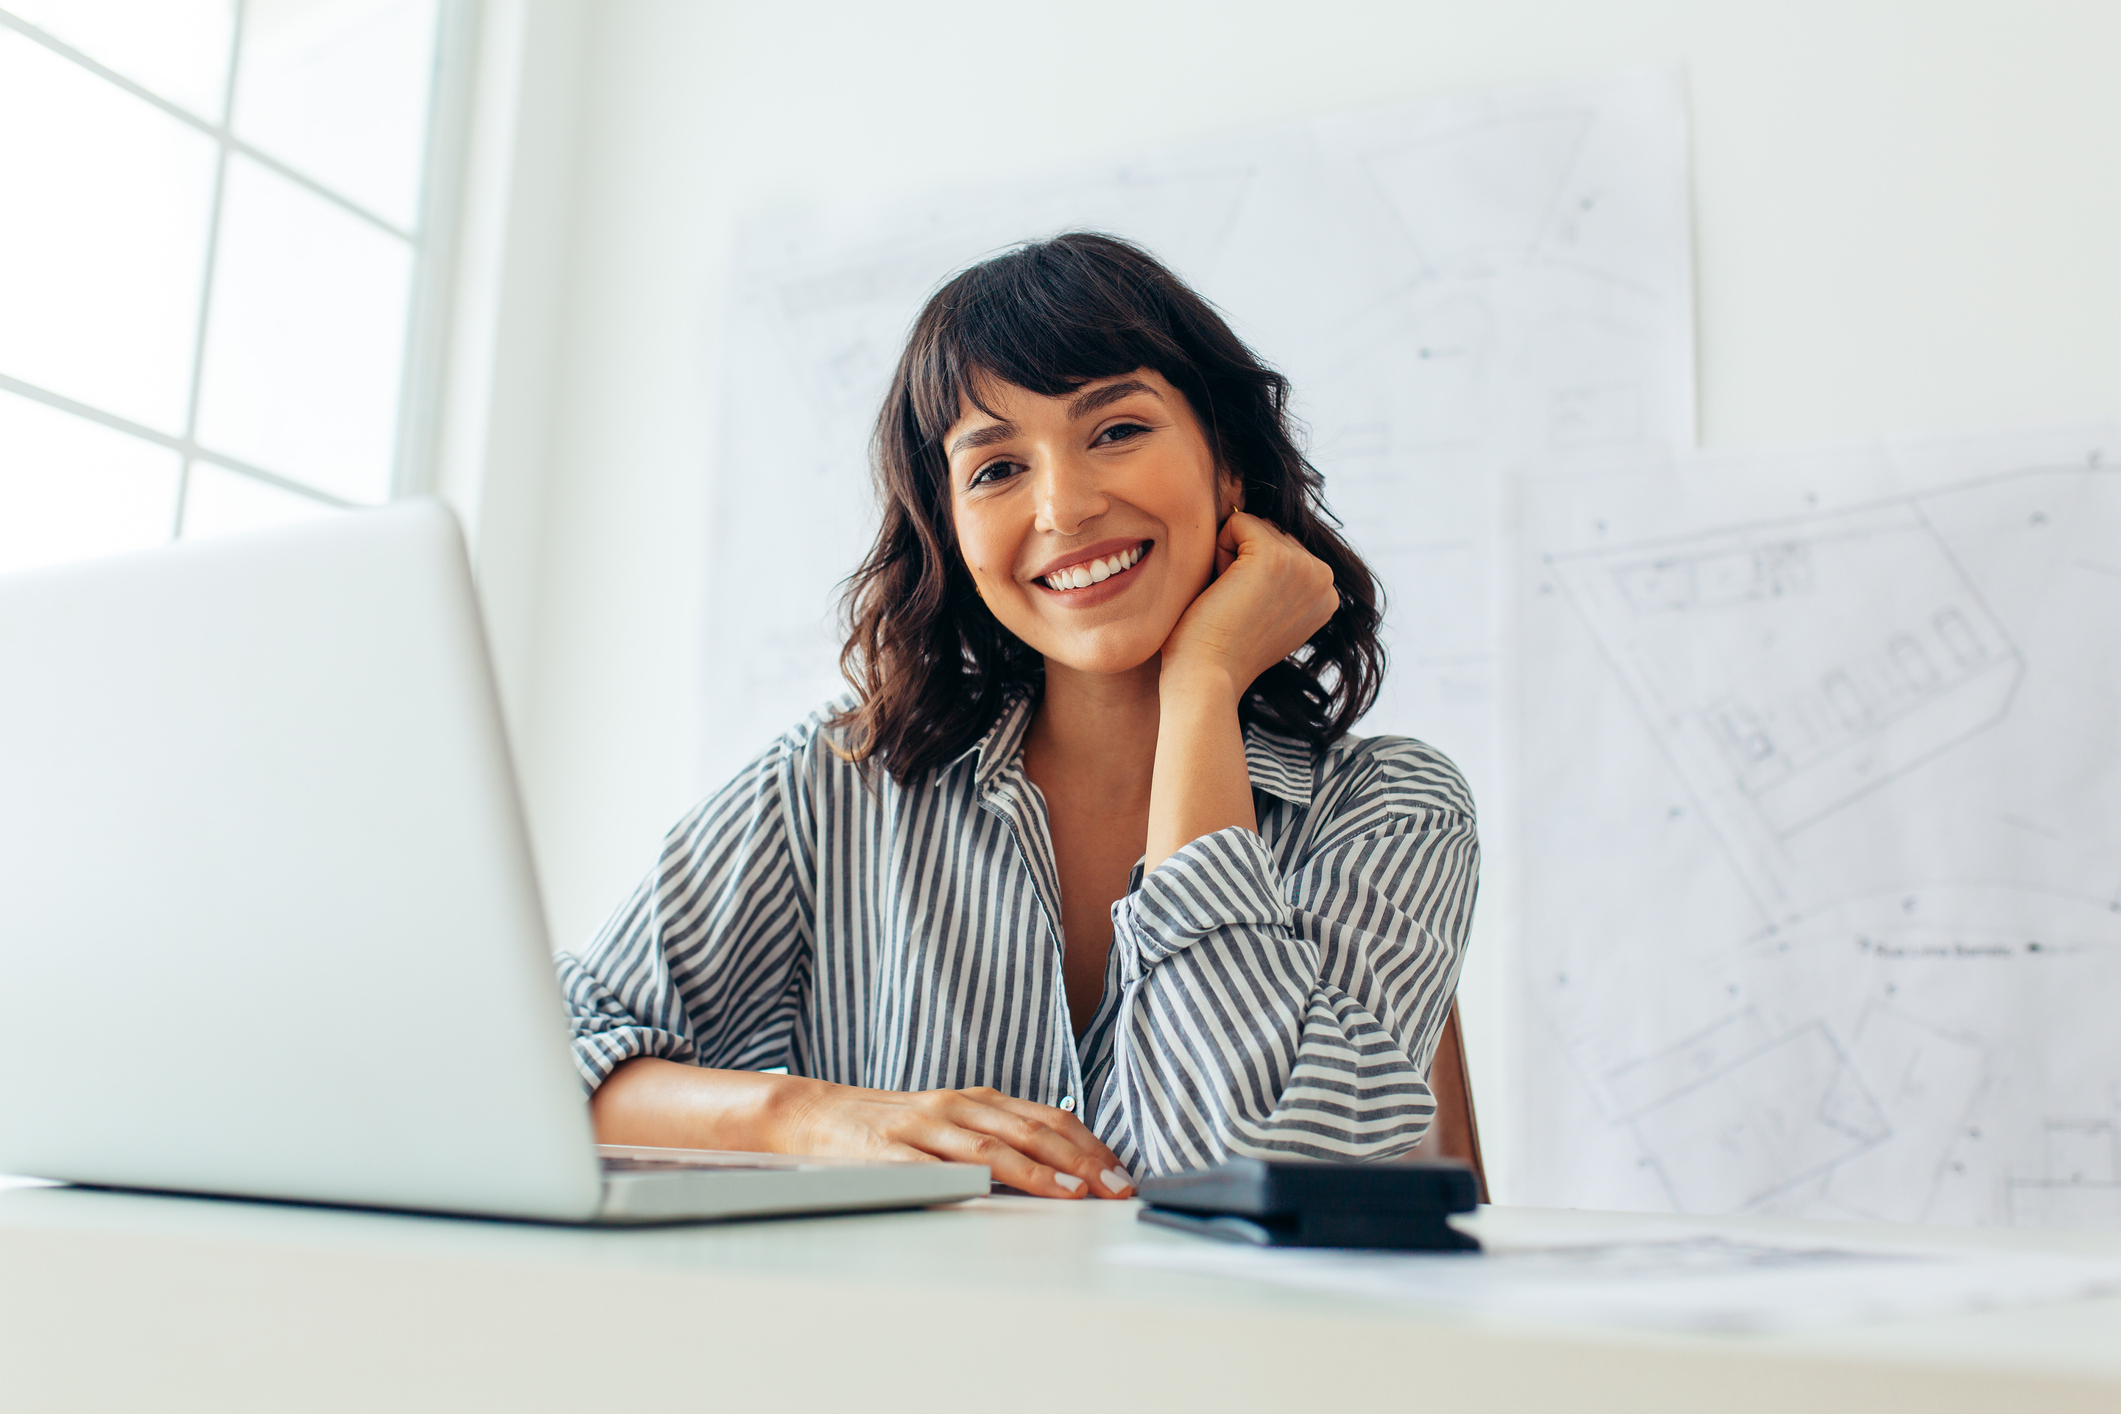 Businesswoman sitting at her desk working on laptop smiling.